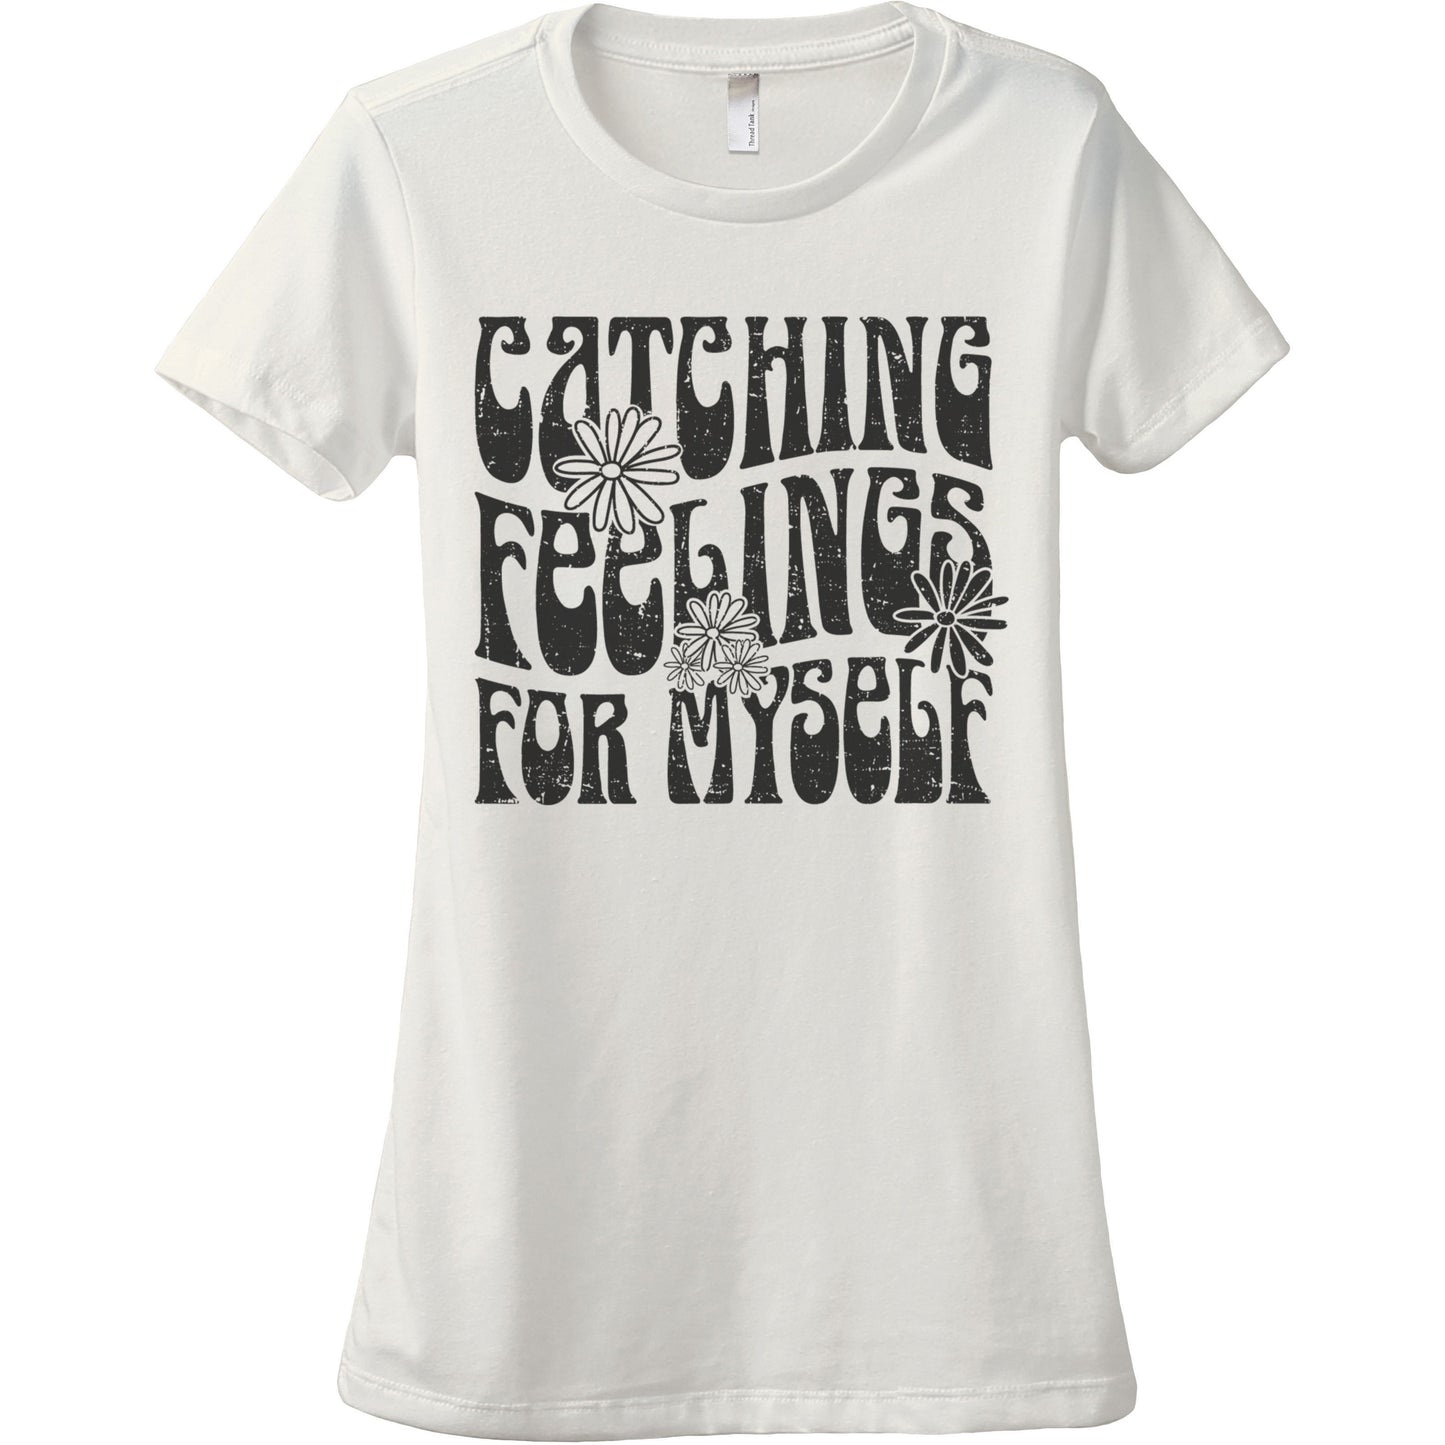 Catching Feelings For Myself Women's Relaxed Crewneck T-Shirt Top Tee Vintage White